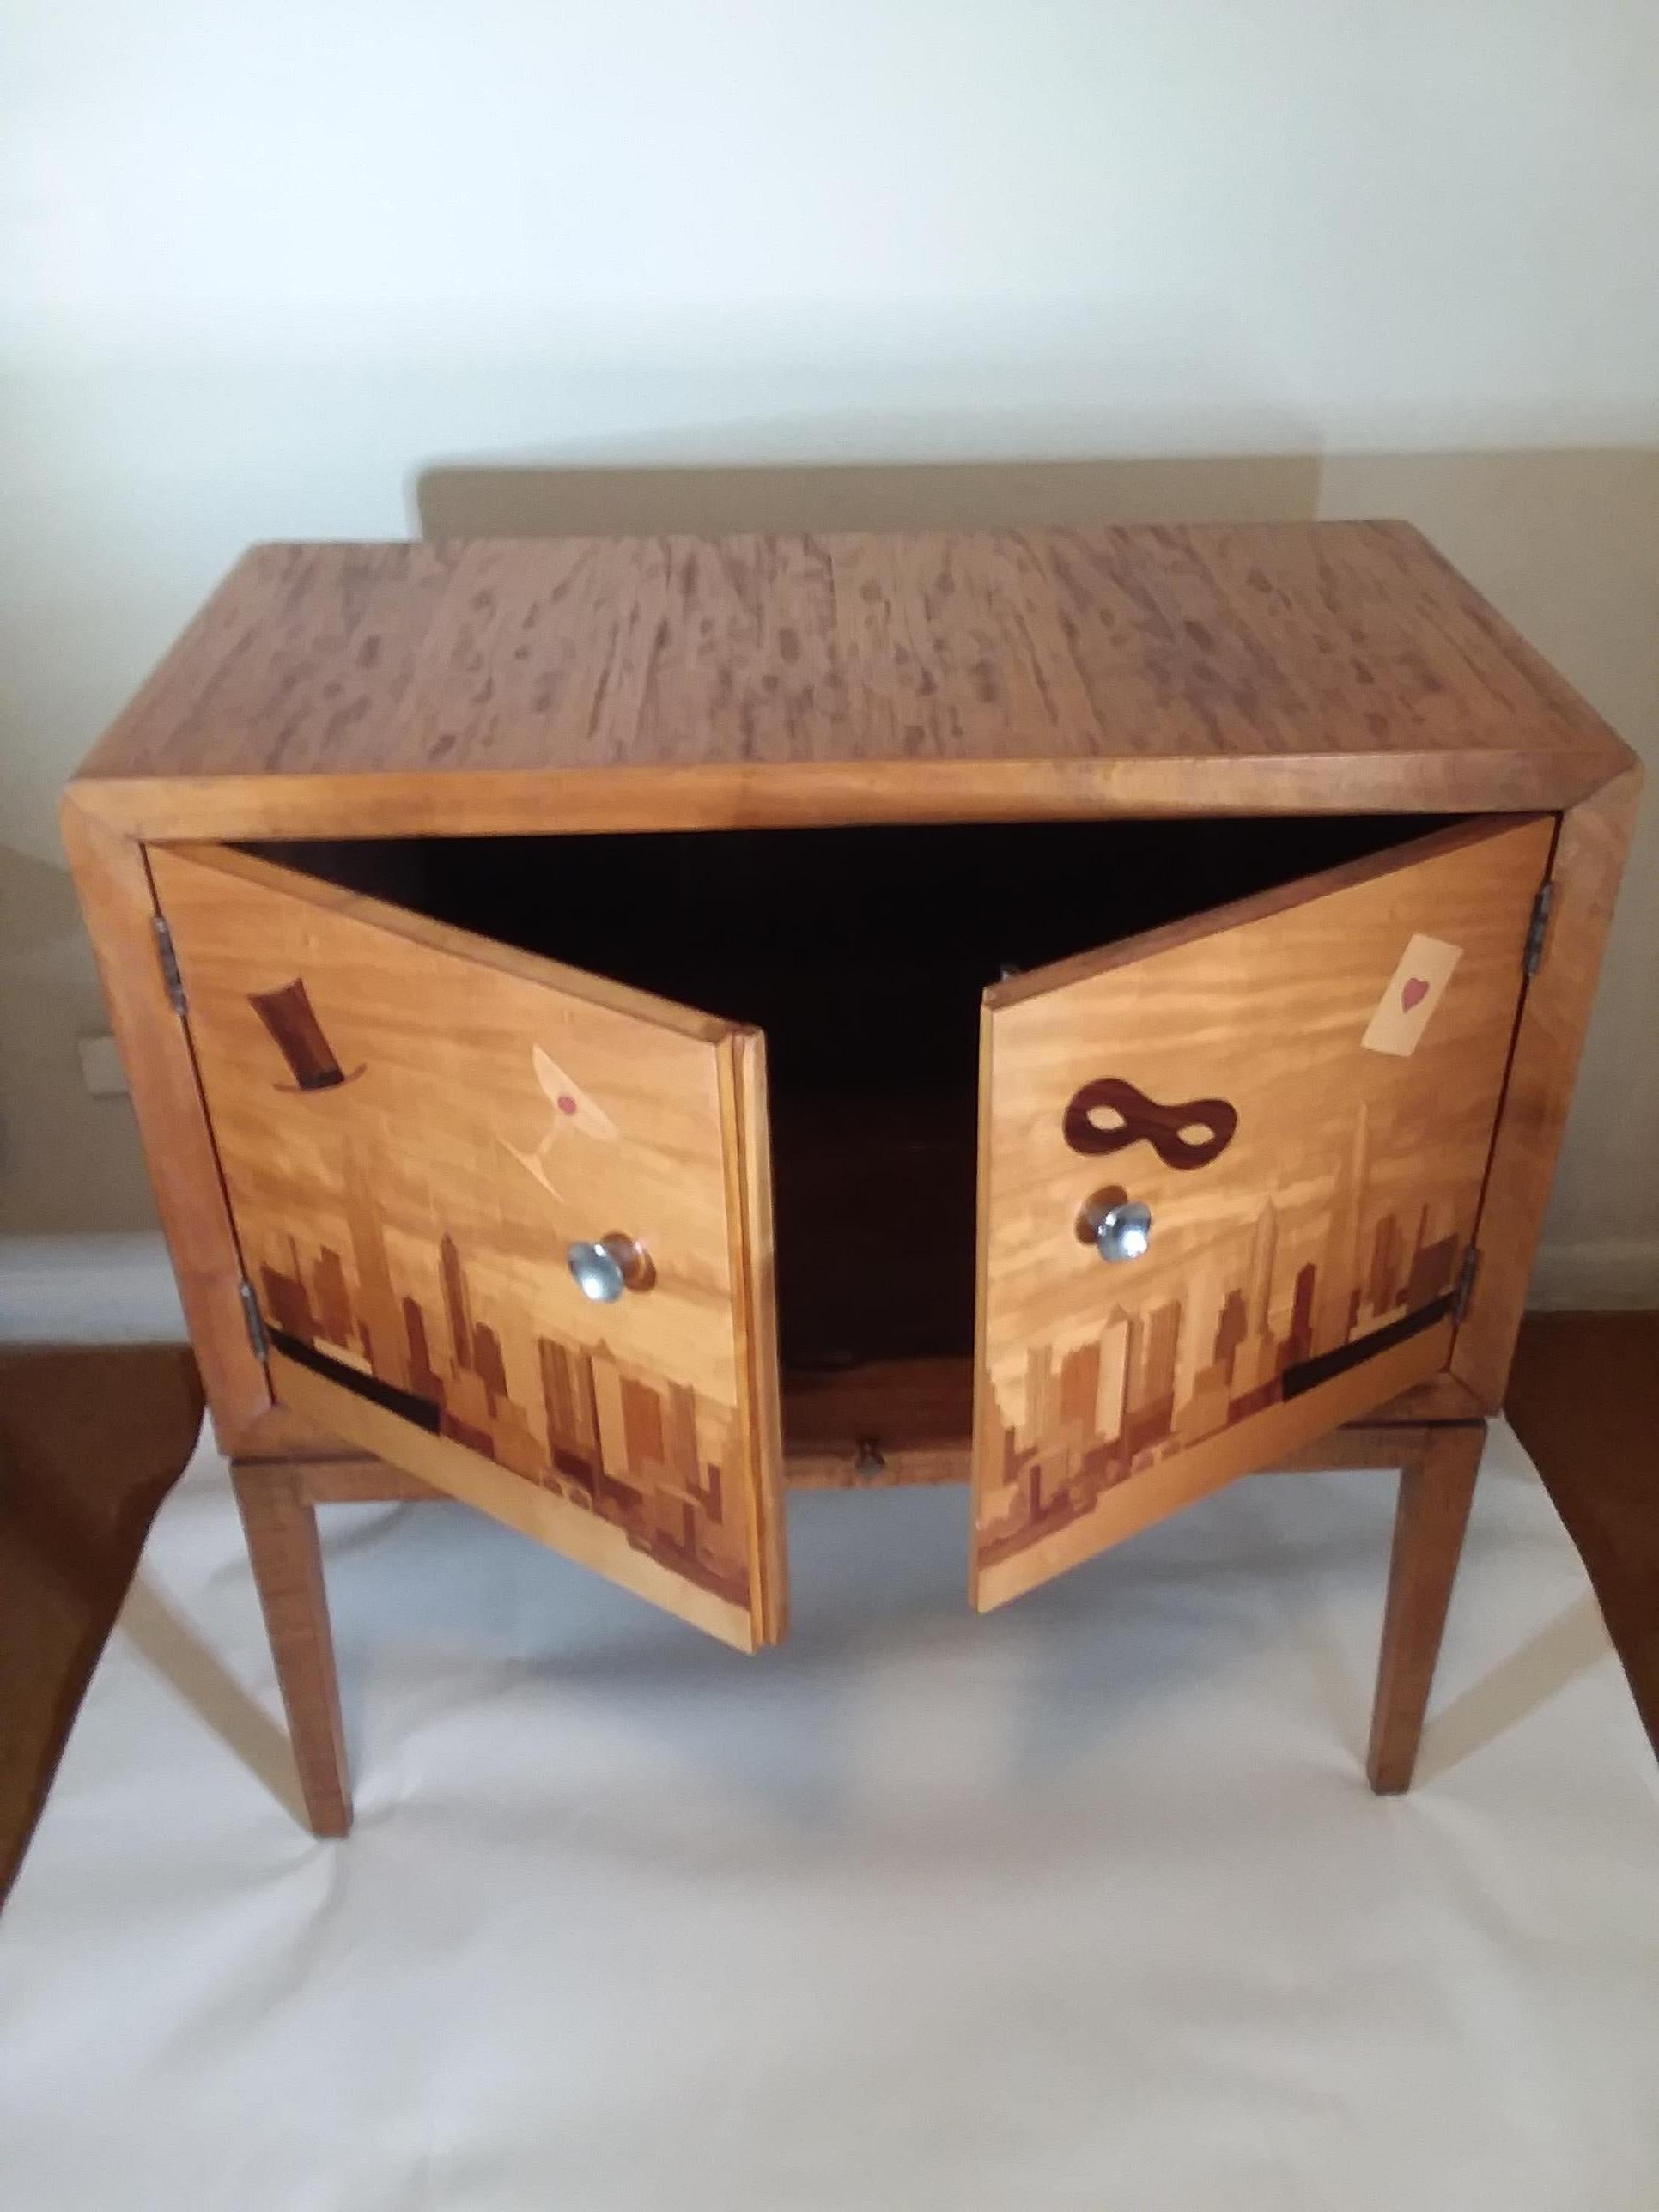 Amazing Art Deco New York dry bar cabinet inlaid with exotic woods with a skyline view of NY from the New Jersey side. Exotic woods in different tones are used to depict the booming skyline as well as a pair of black steamer ships coming into port